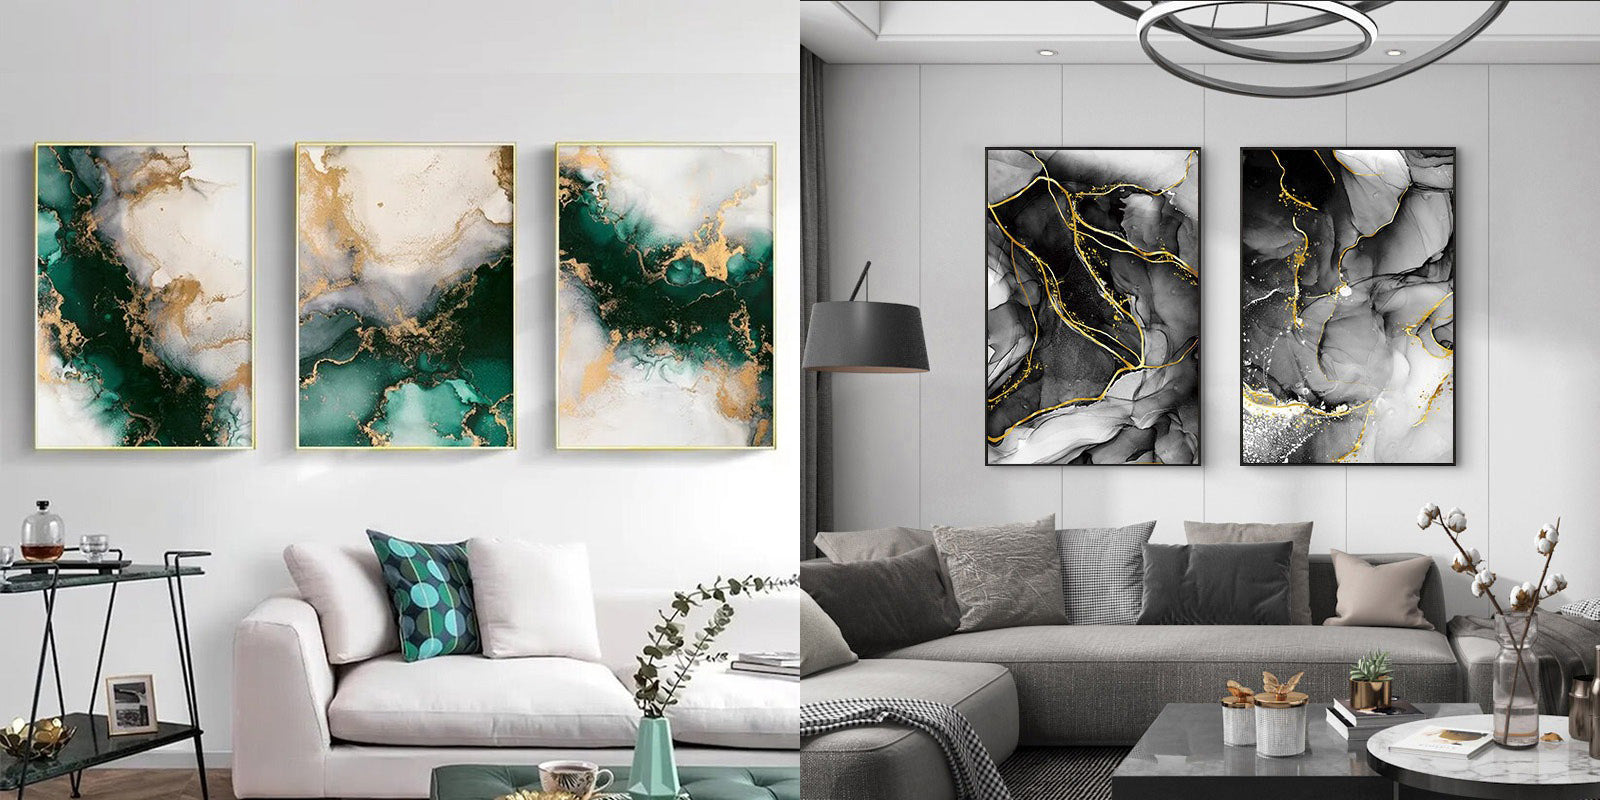 Be inspired by new trends in Nordic abstract wall art for the living room, bedroom and office